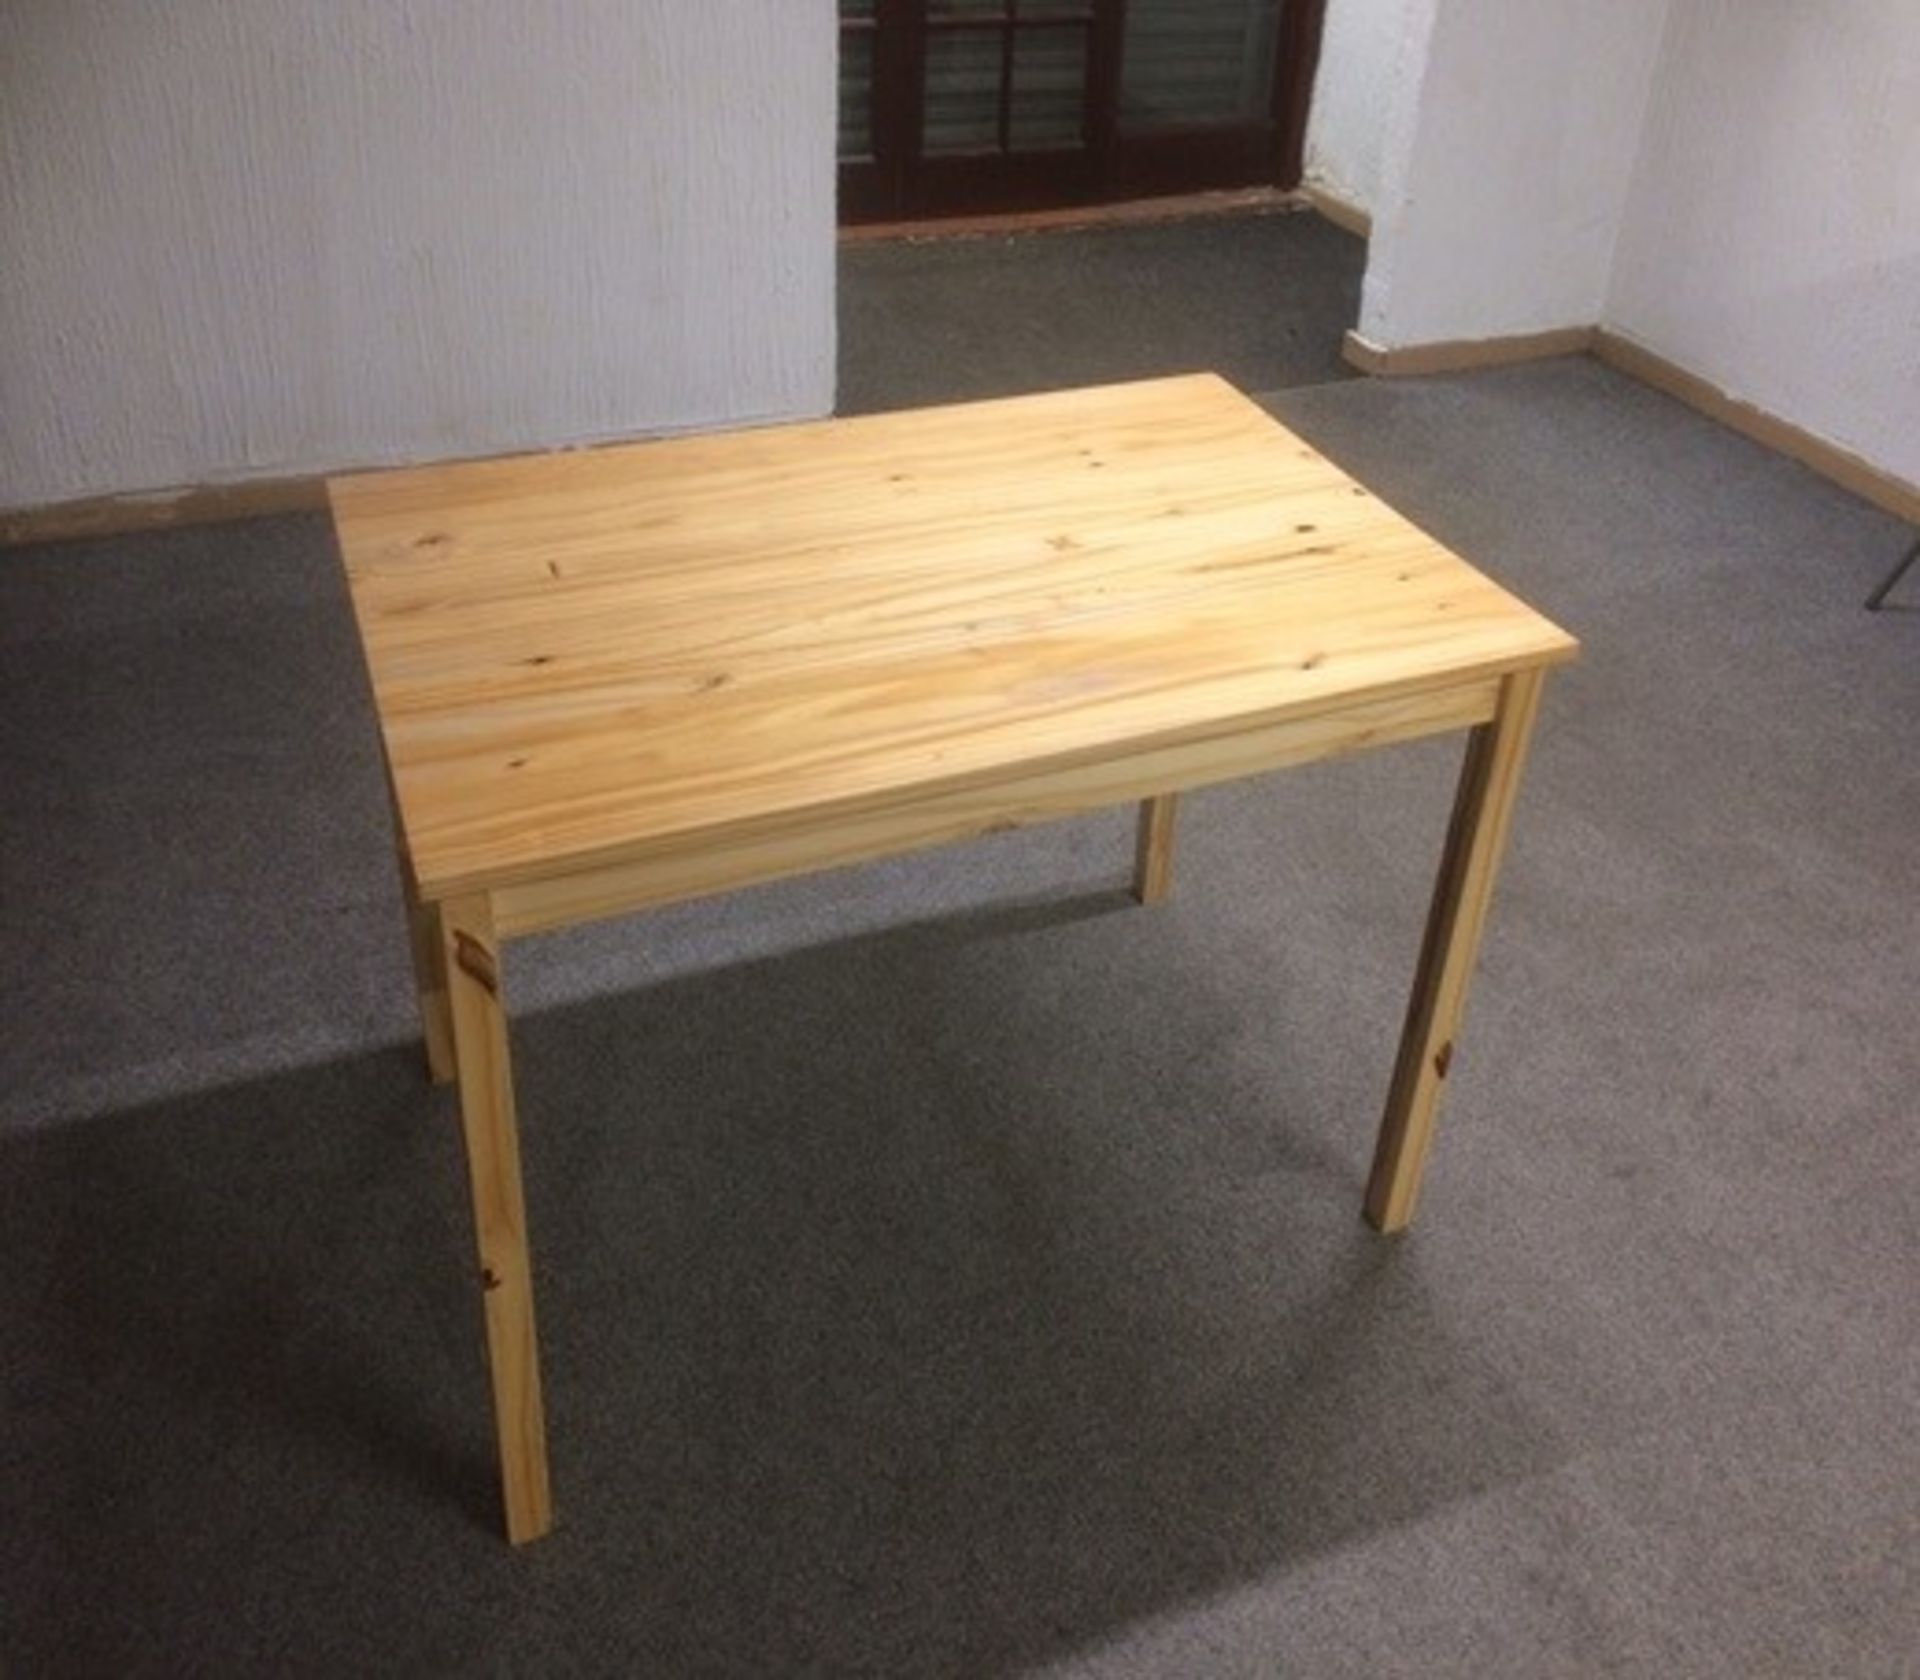 1 BOXED WOODEN TABLE - DTBL009/NAT (PUBLIC VIEWING AVAILABLE)